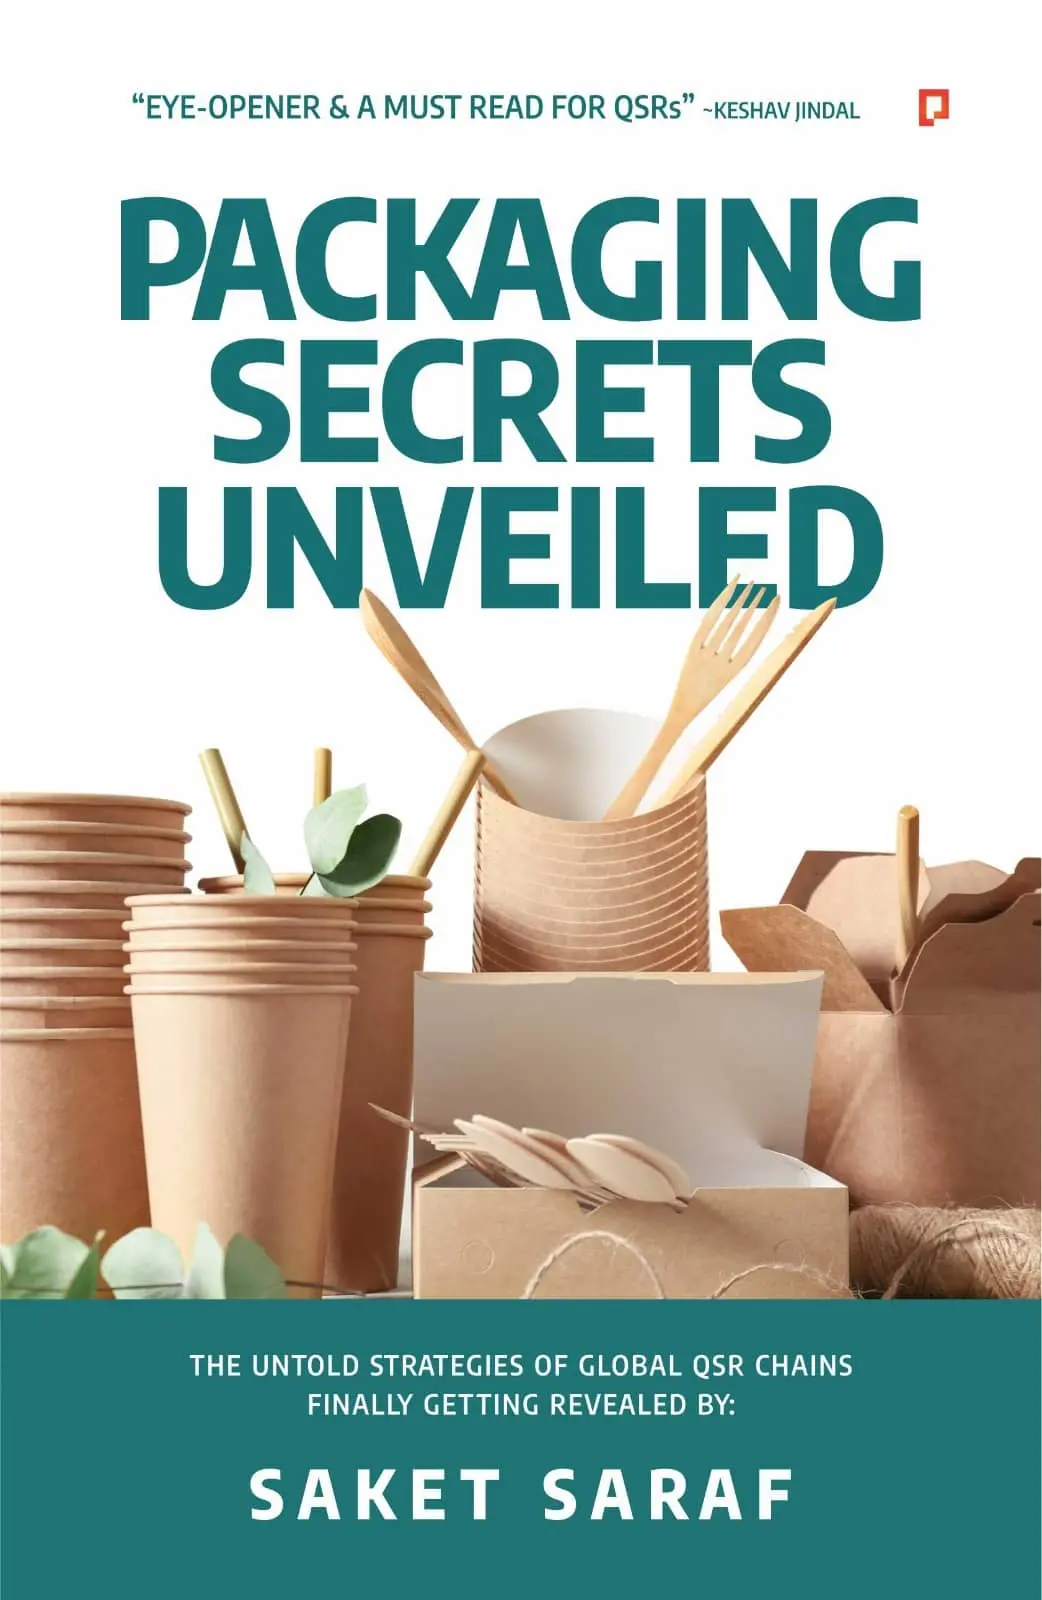 Packaging Secrets Unveiled, Business Strategy & Management books